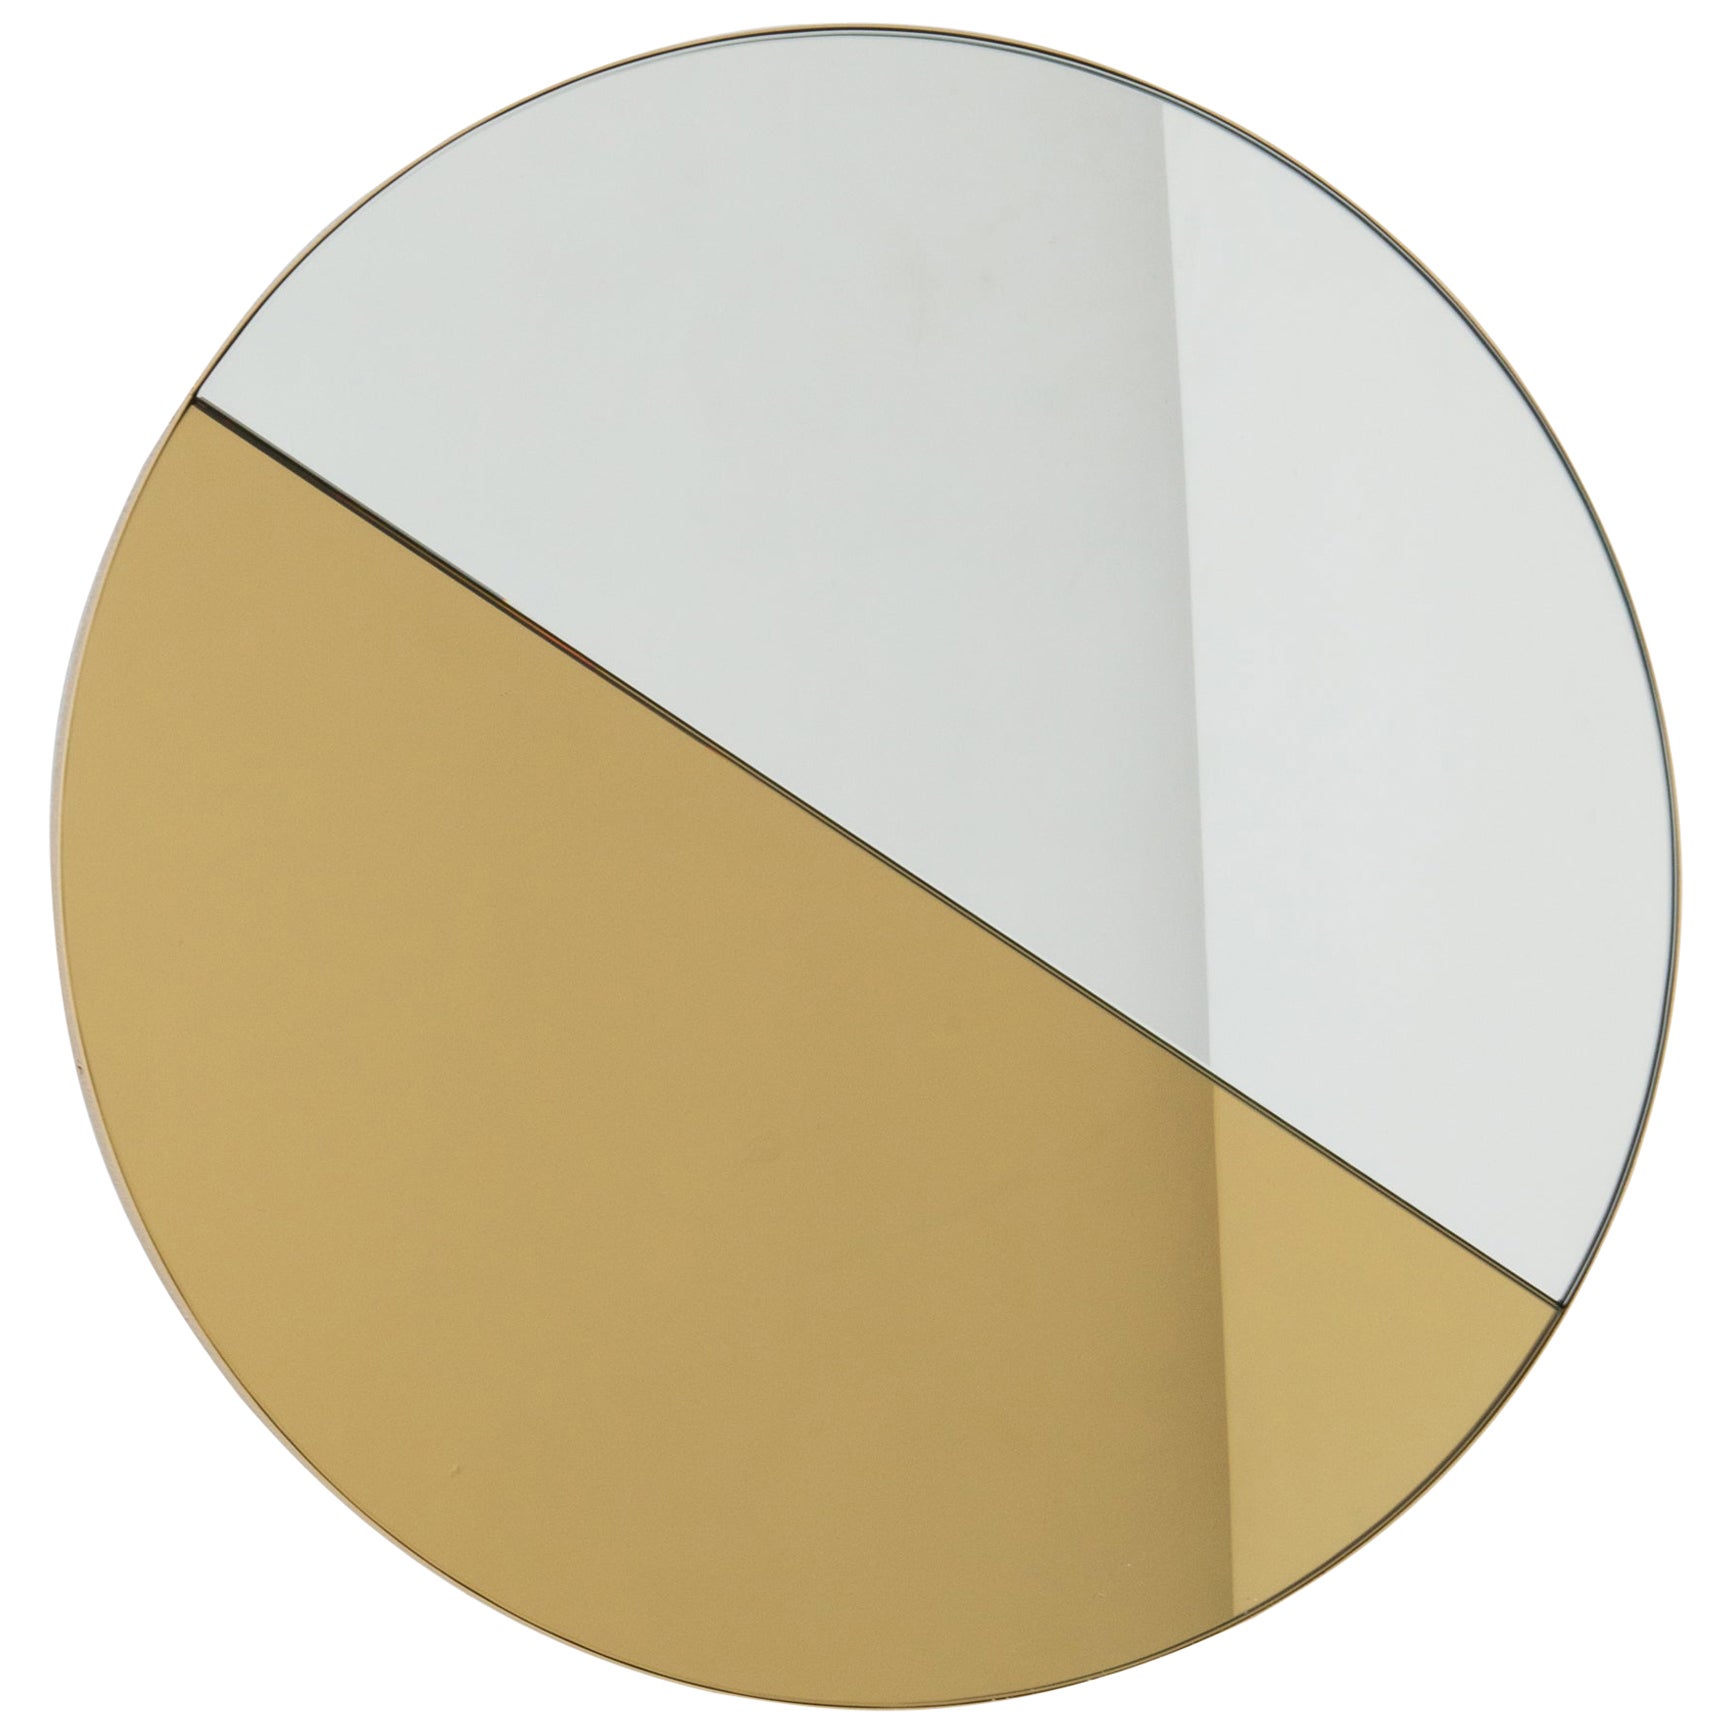 Orbis Dualis Mixed Gold and Silver Tinted Round Mirror with Brass Frame, Regular